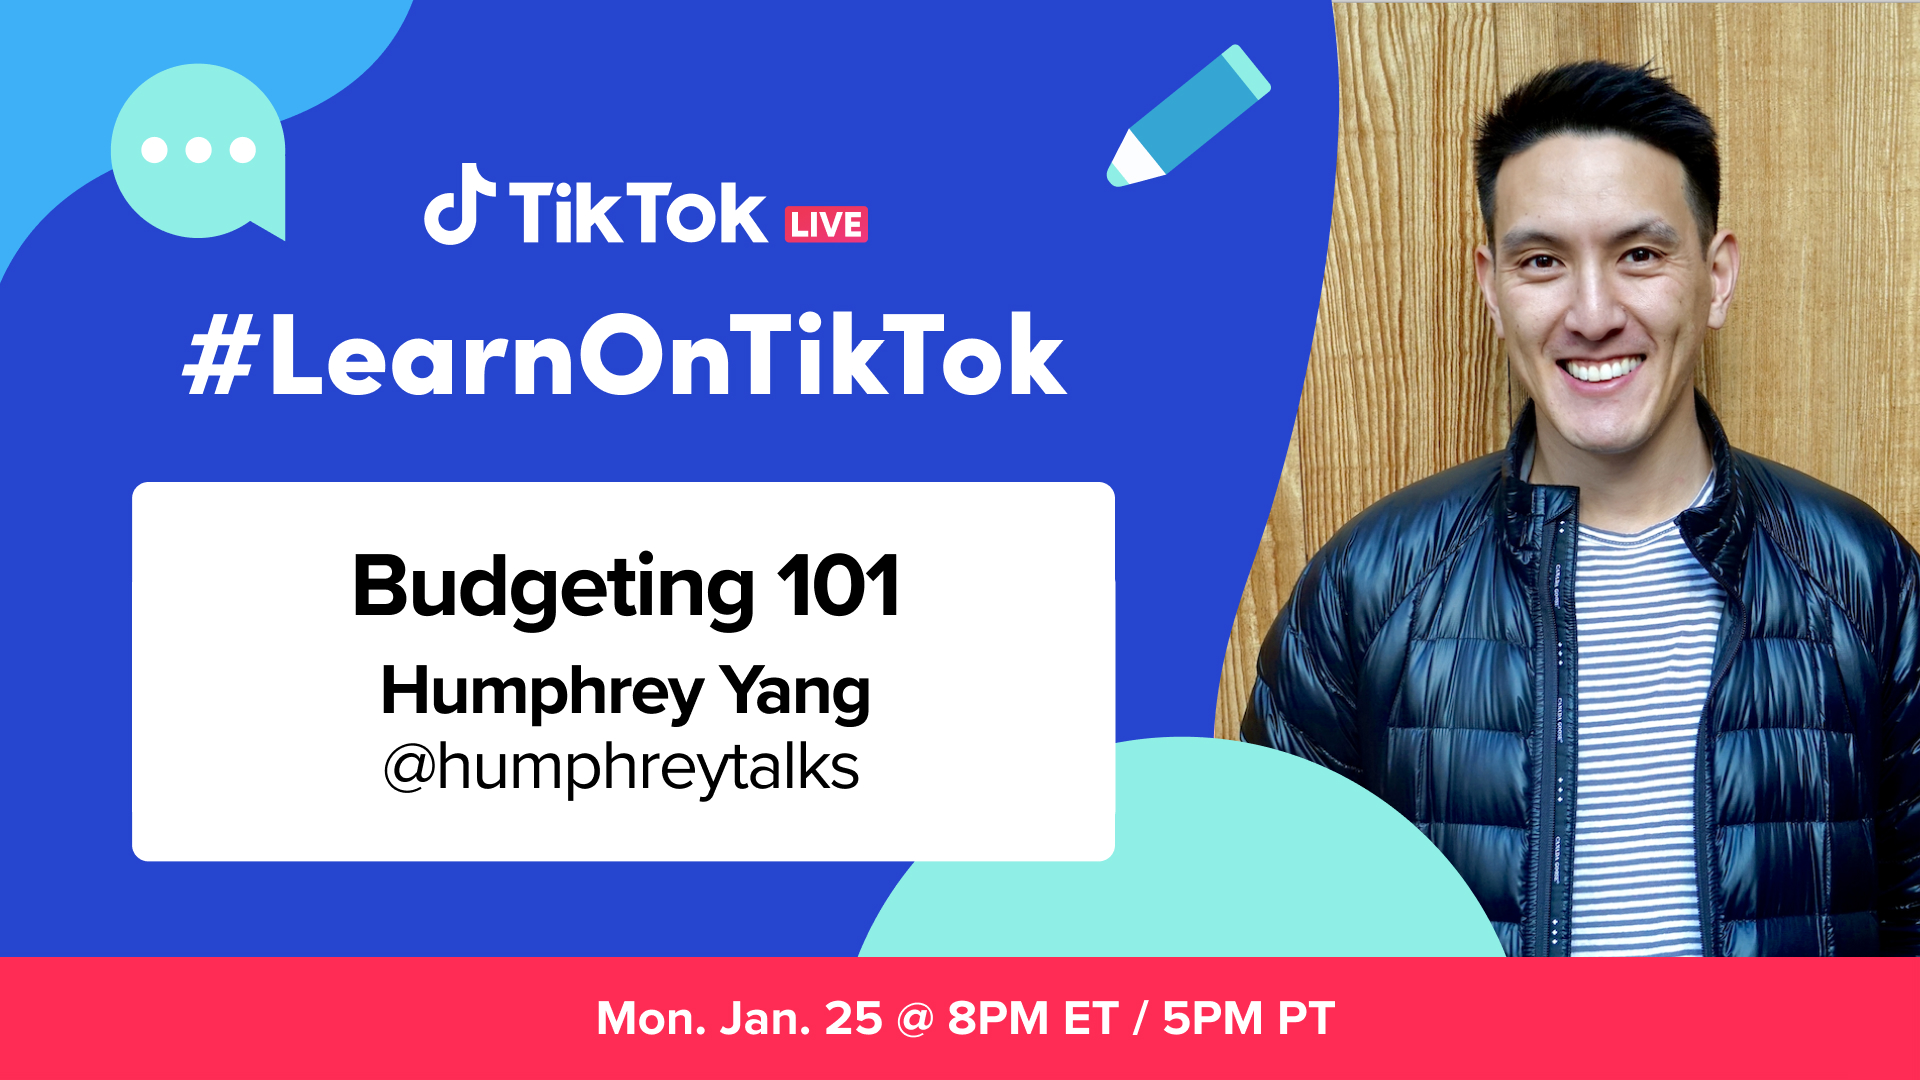 TikTok US on X: Let's talk budgeting 💰 @Humphreytalks will share some  tips, today at 5 PM PT: t.co8AlT042NZc? #LearnOnTikTok  t.co95tDfRrIeN  X